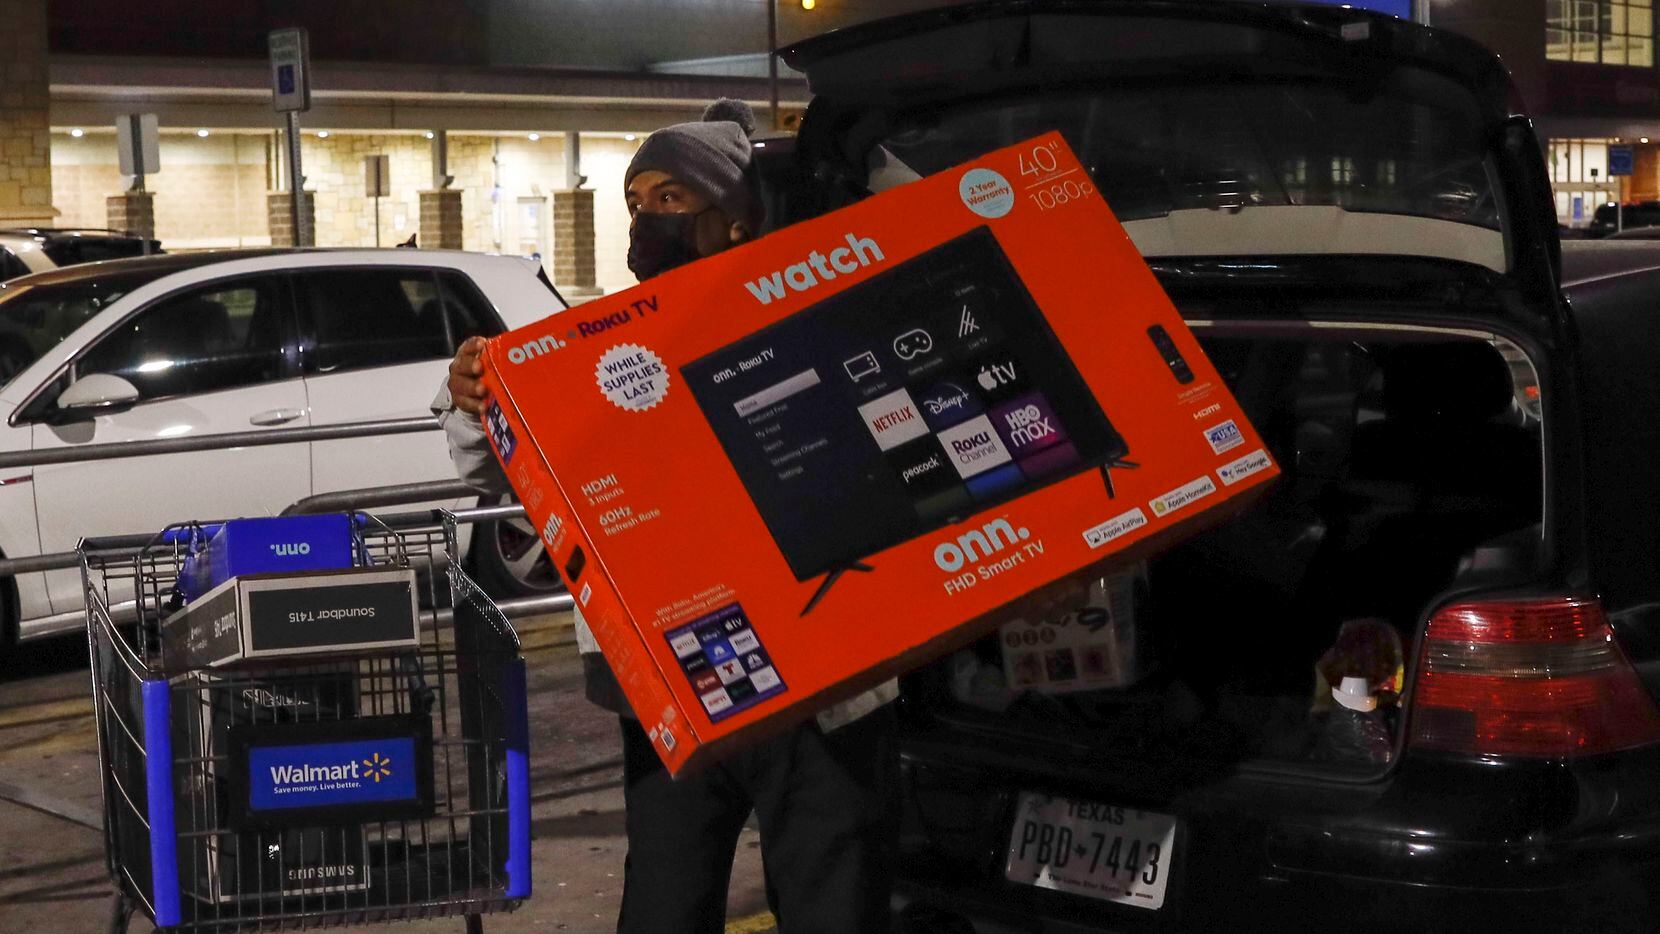 Louis Garcia, loads a 40-inch TV into the back of his car just before 6 a.m. during Black Friday shopping in Dallas on Friday, Nov. 26, 2021. Garcia said it was only the second time he had shopped on Black Friday. He found what he wanted at the right prices.